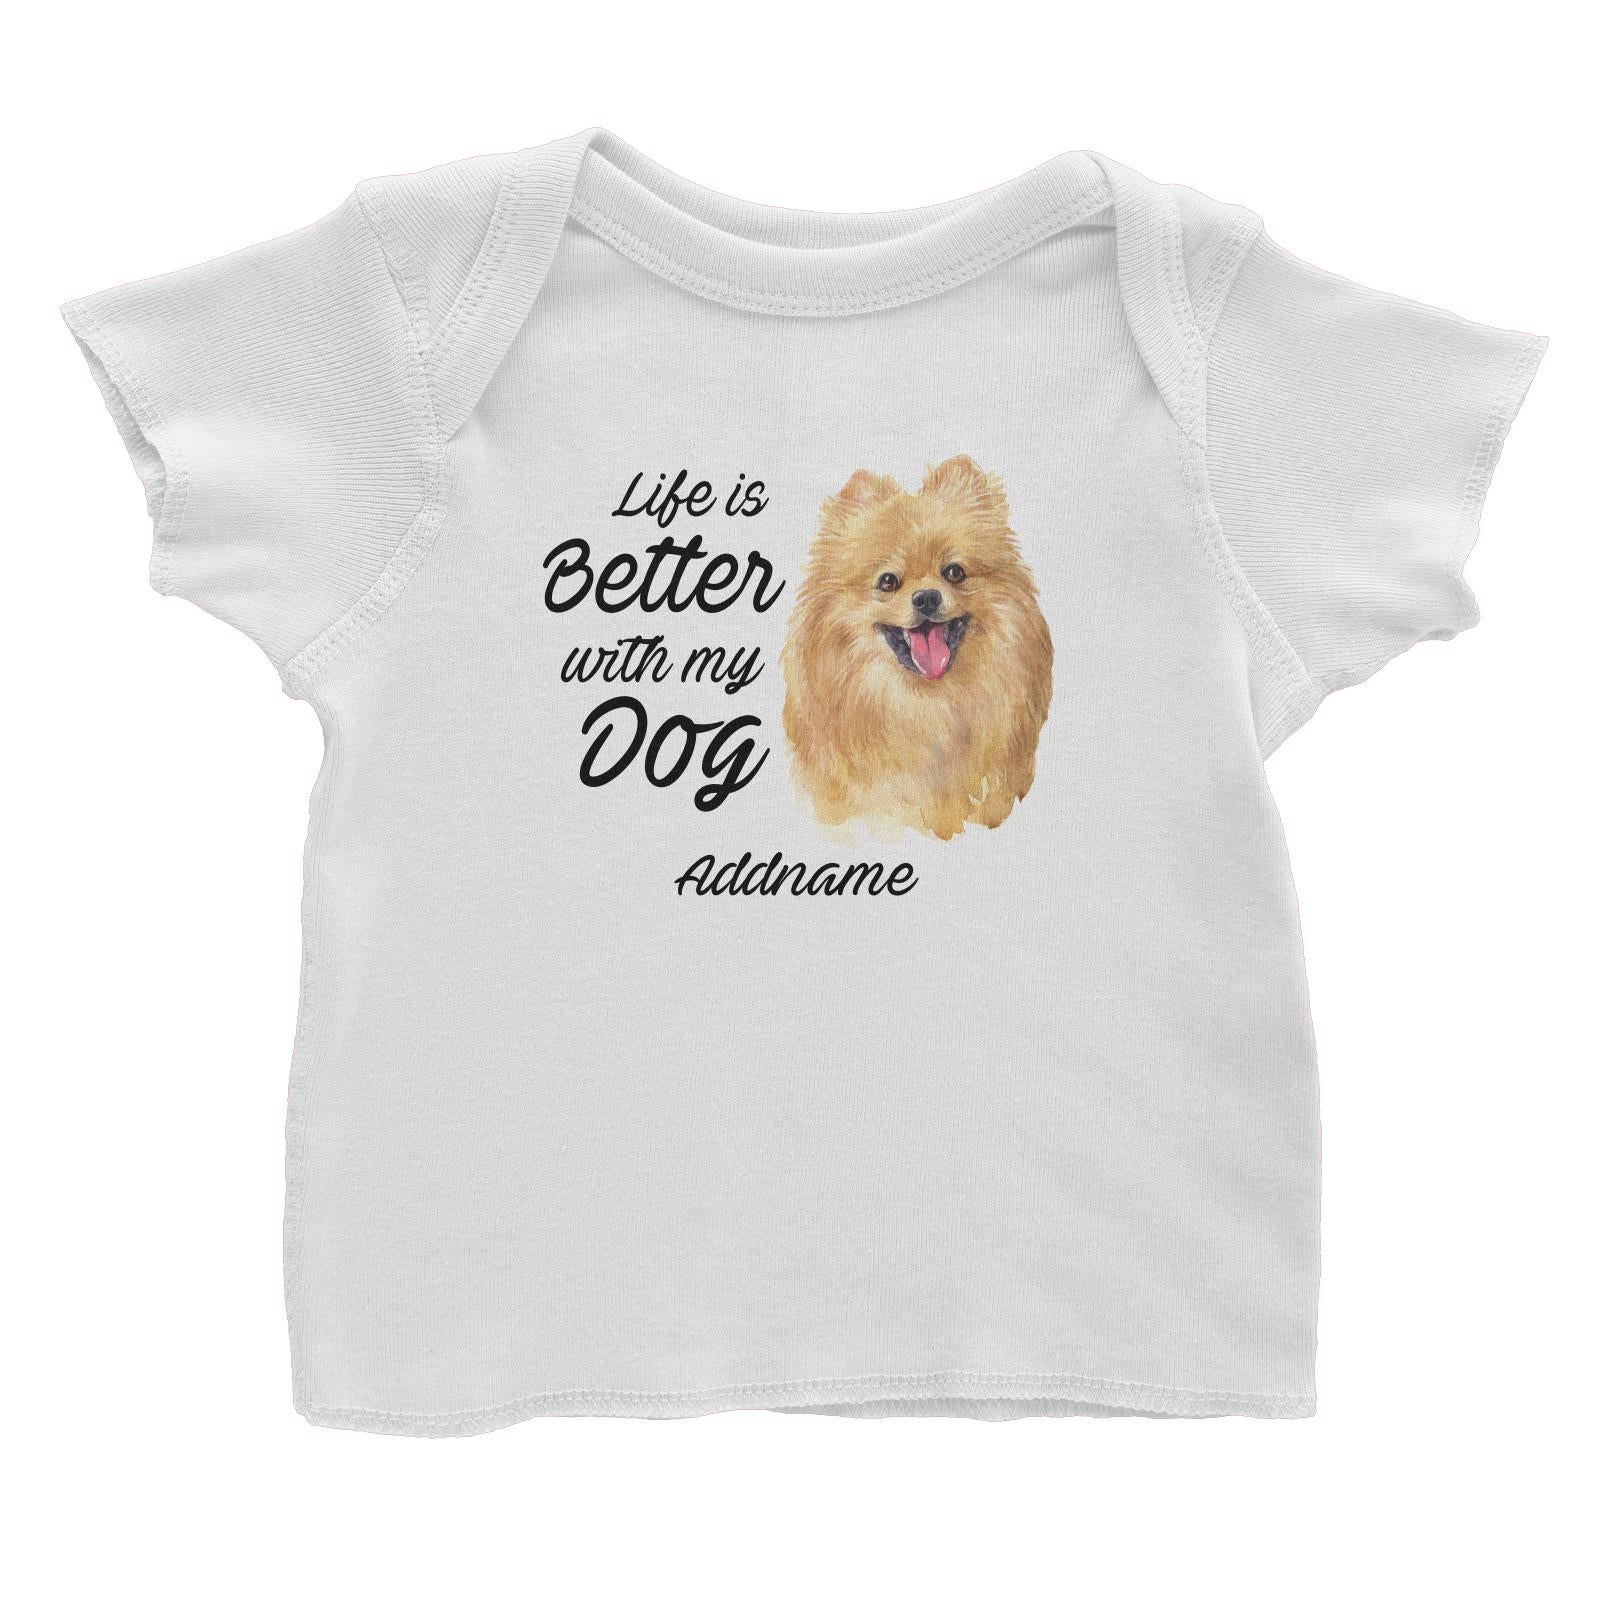 Watercolor Life is Better With My Dog Pomeranian Addname Baby T-Shirt